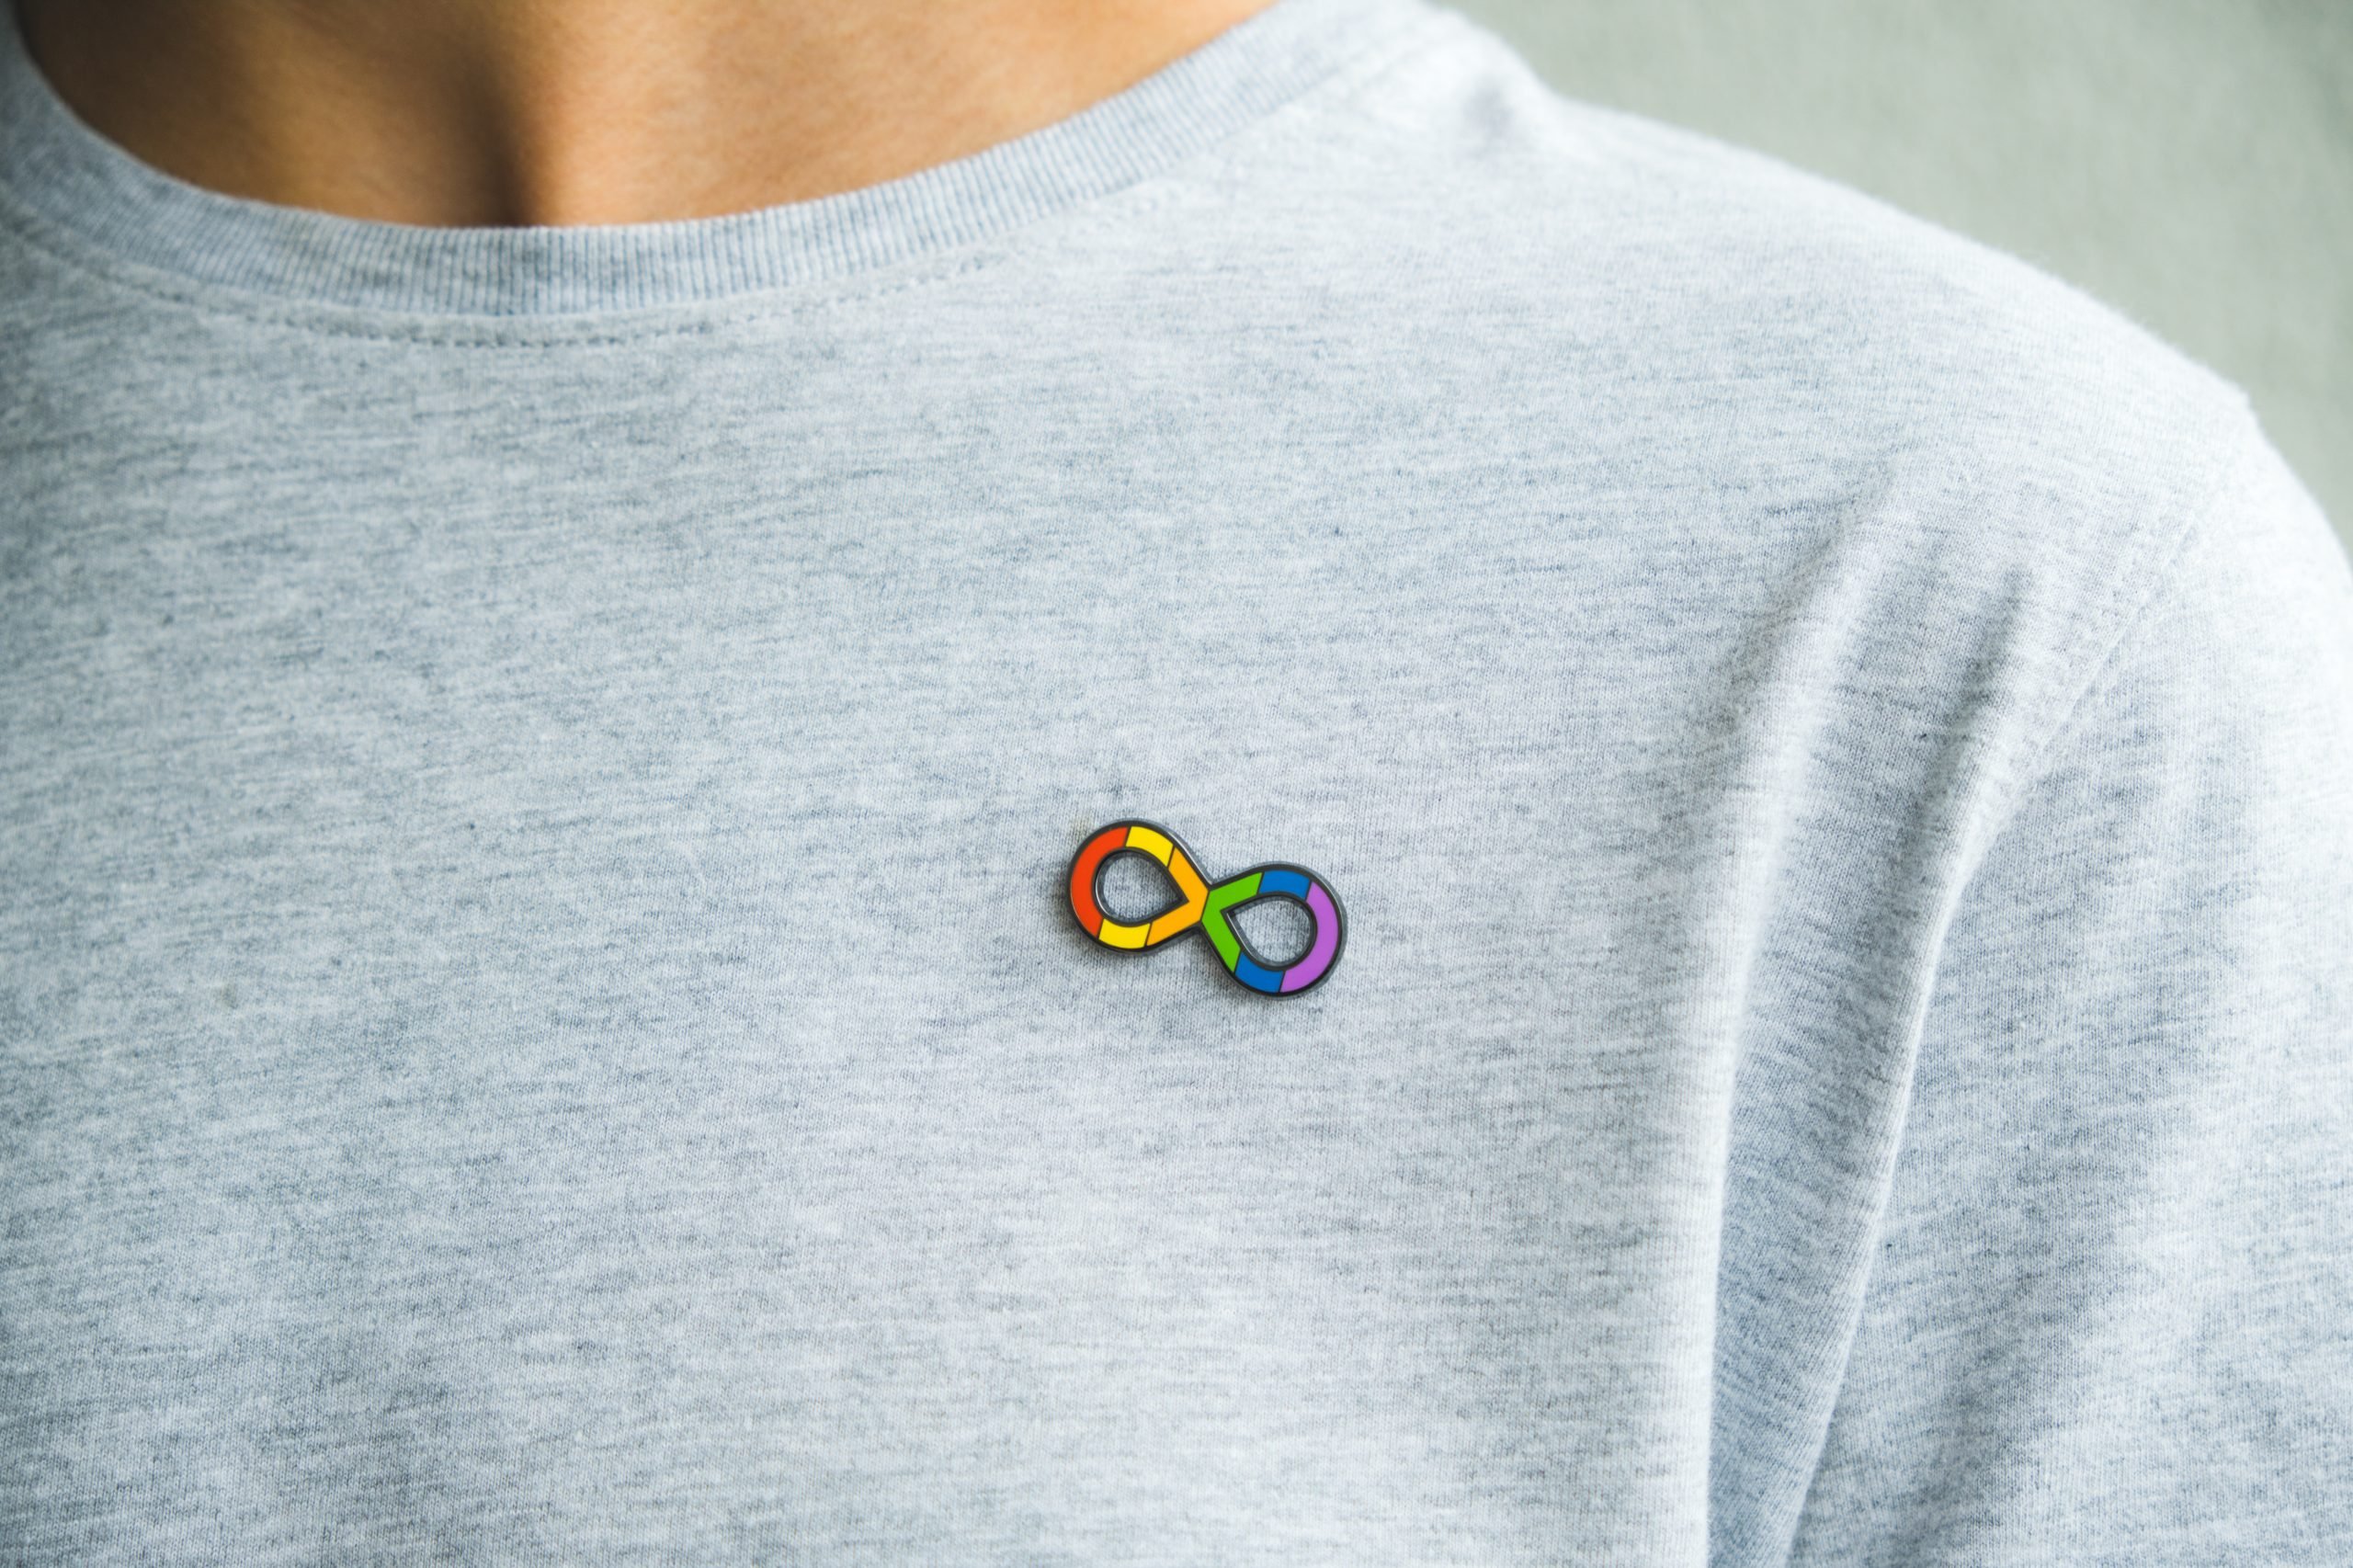 Teenage boy with autism infinity rainbow symbol sign metallic pin brooch on t-shirt. World autism awareness day, autism rights movement, neurodiversity, autistic acceptance movement.